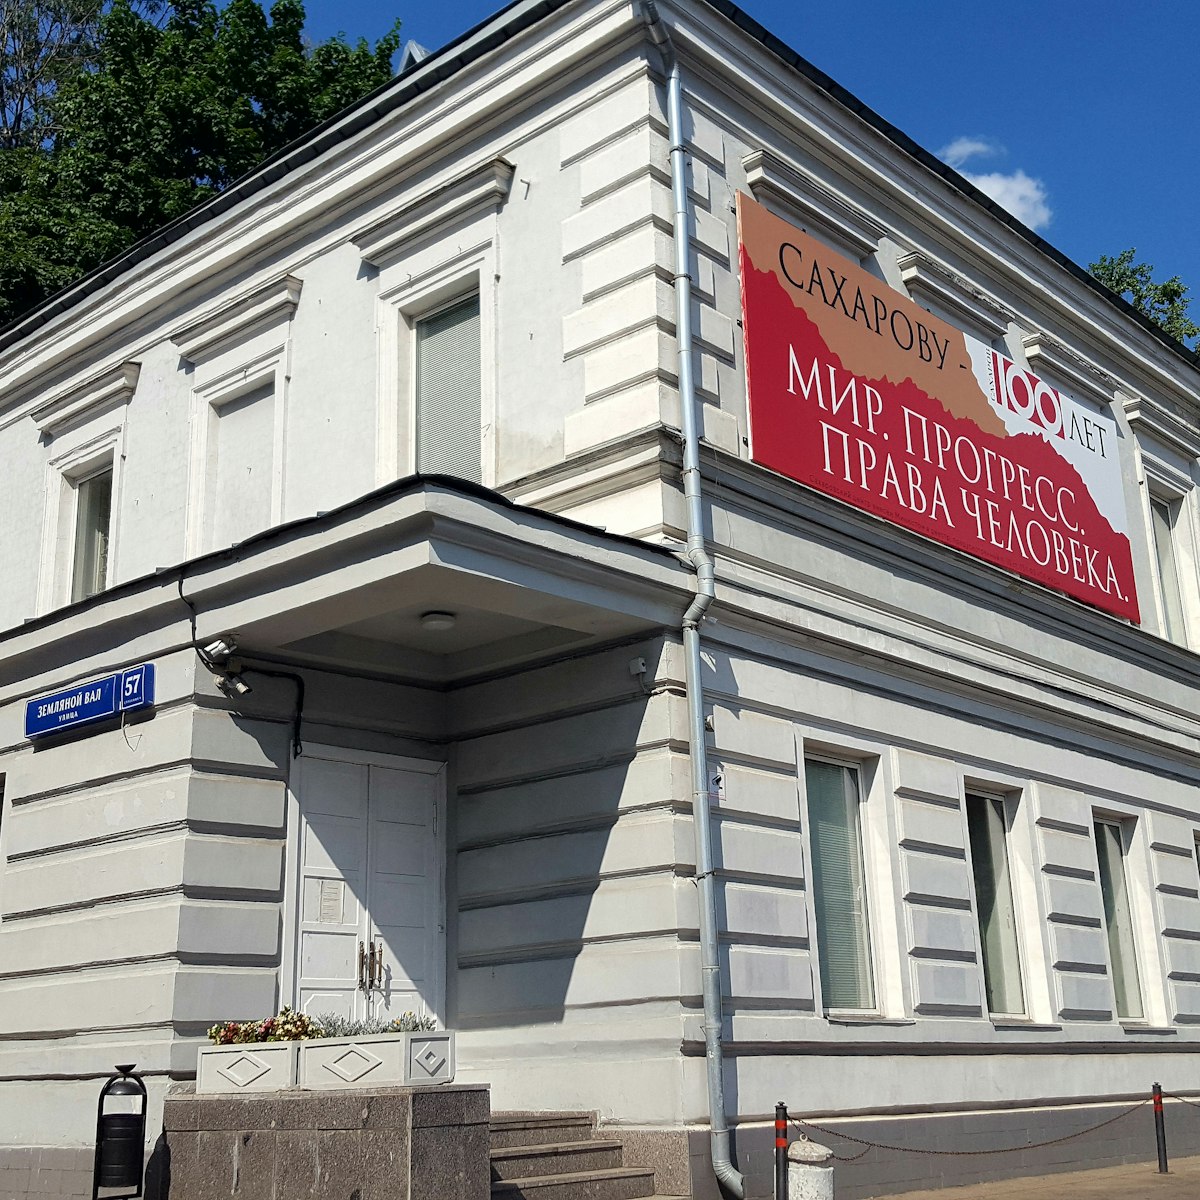 The Sakharov Center museum and cultural center in Moscow devoted to protection of human rights in Russia preserving the legacy of Andrei Sakharov.